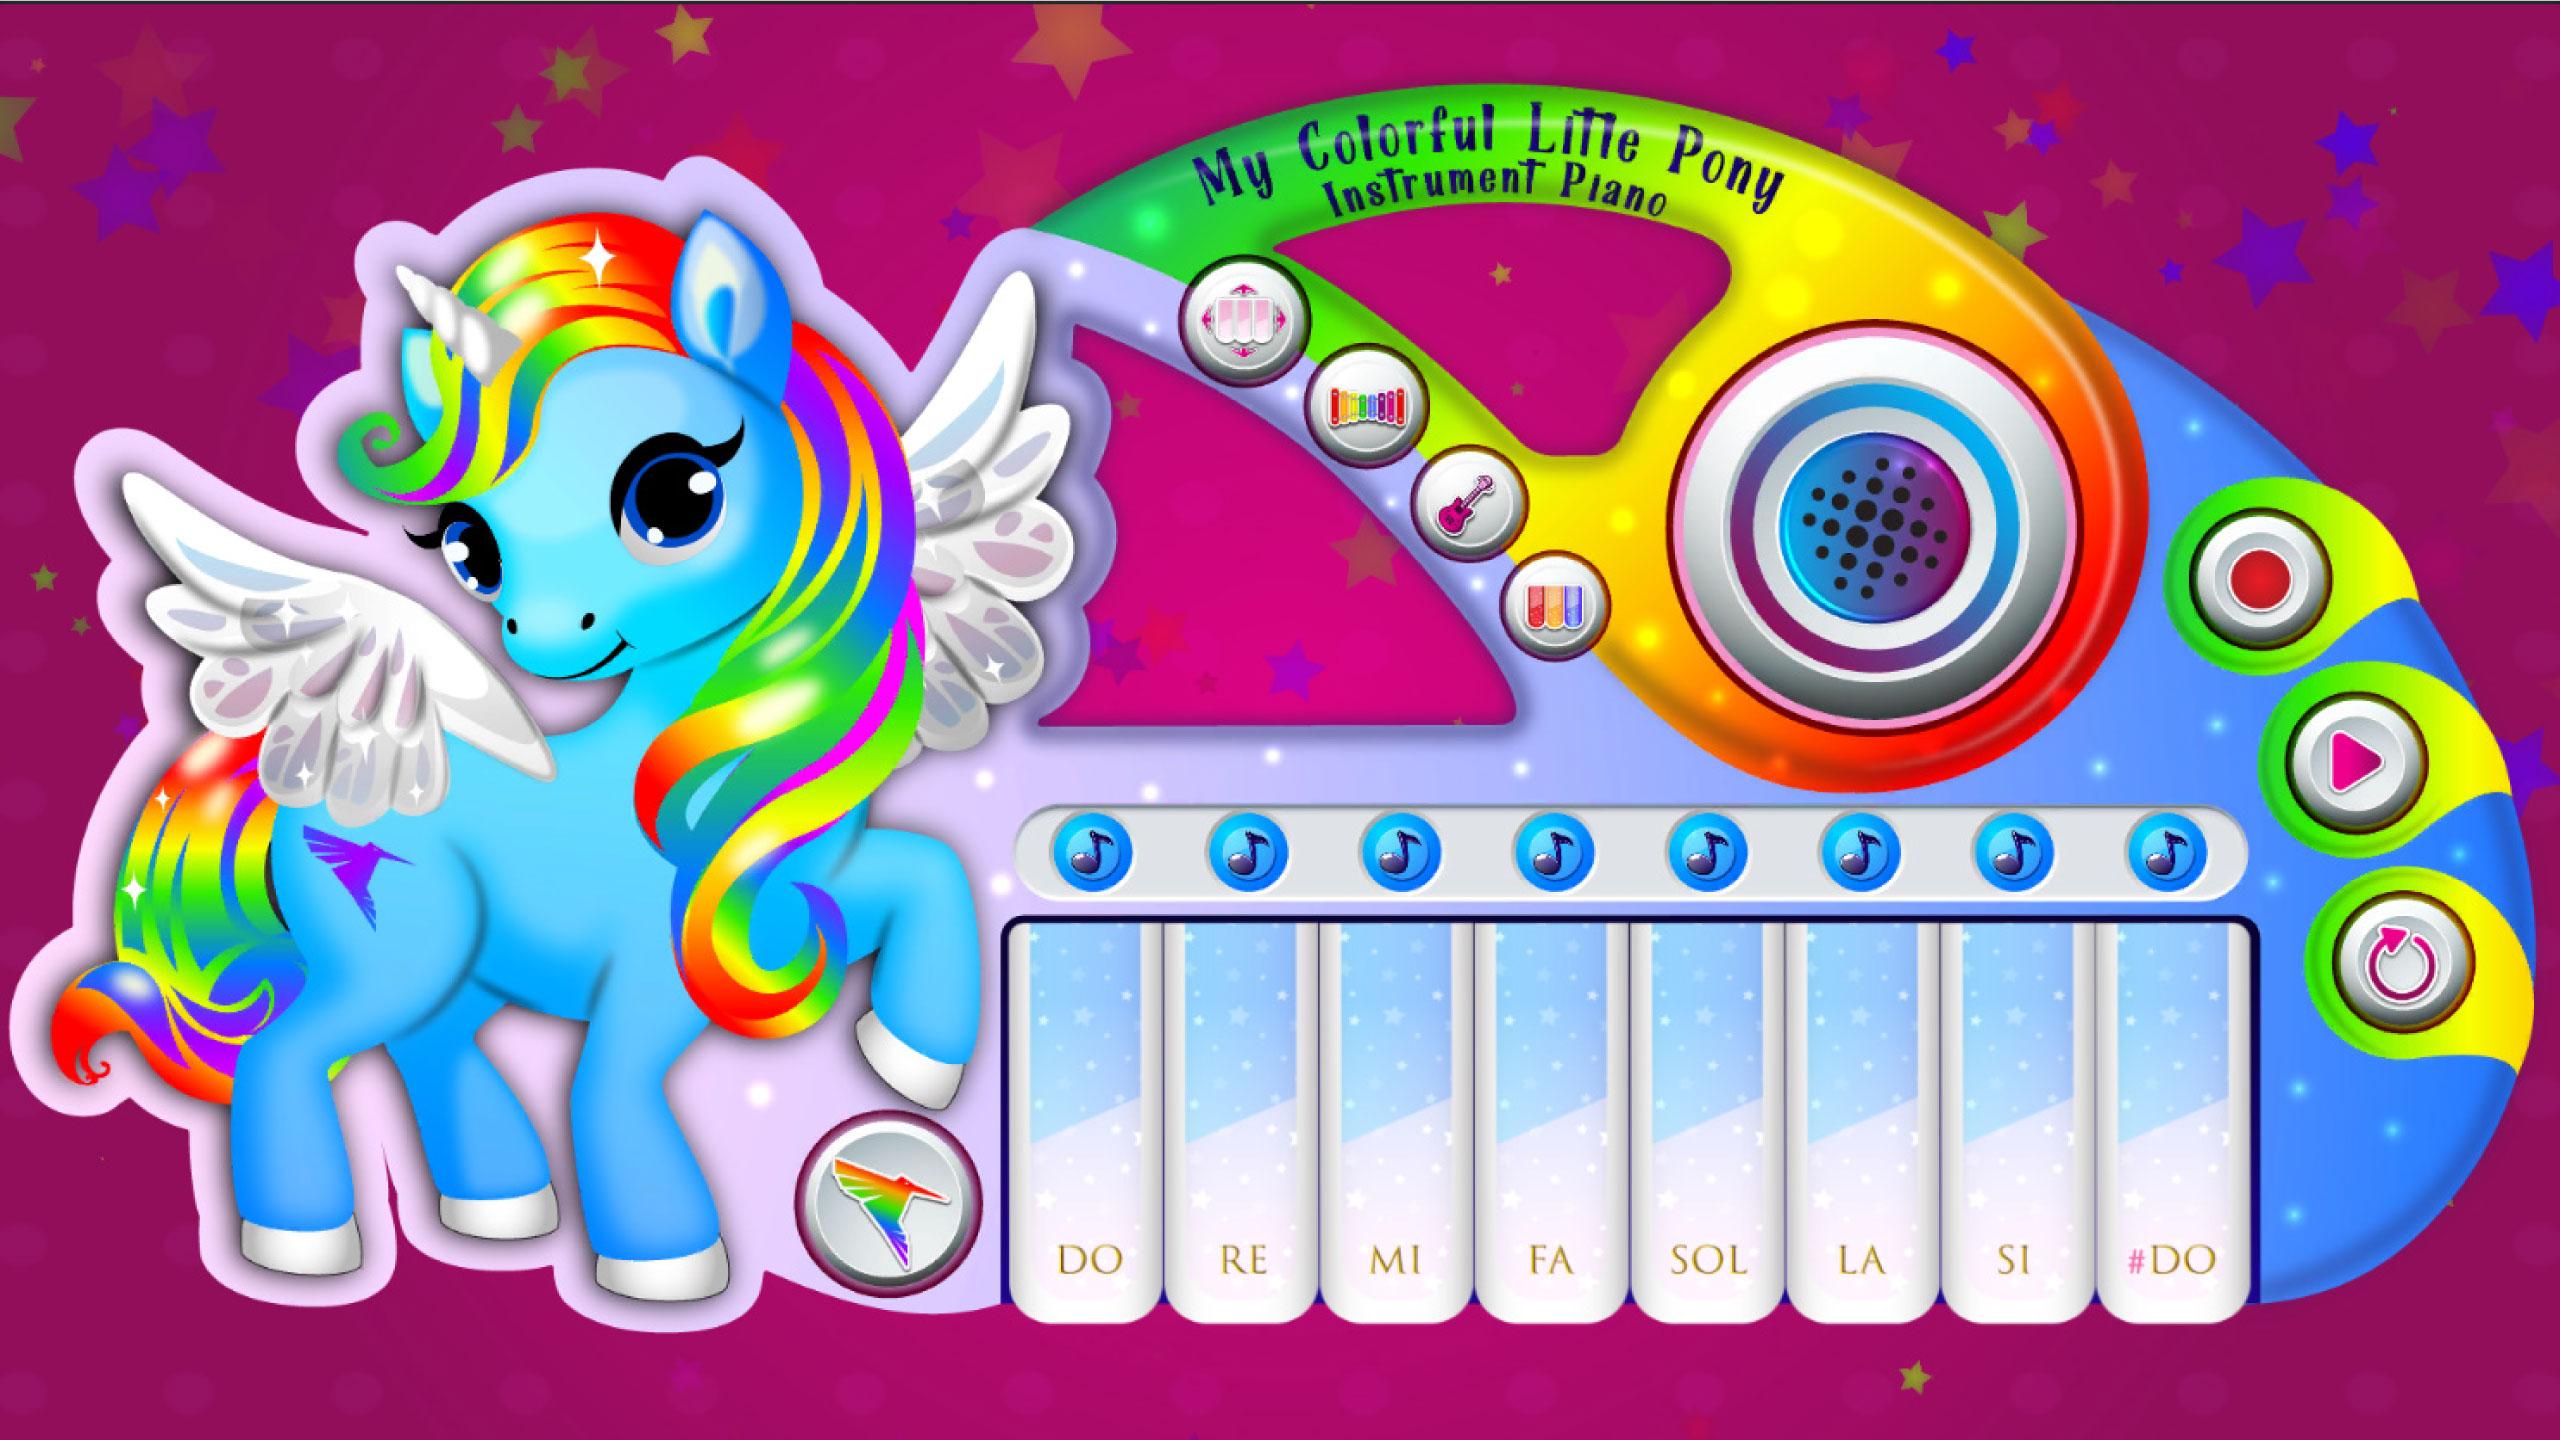 My Colorful Litle Pony Instrument - Piano 2.0 Screenshot 18